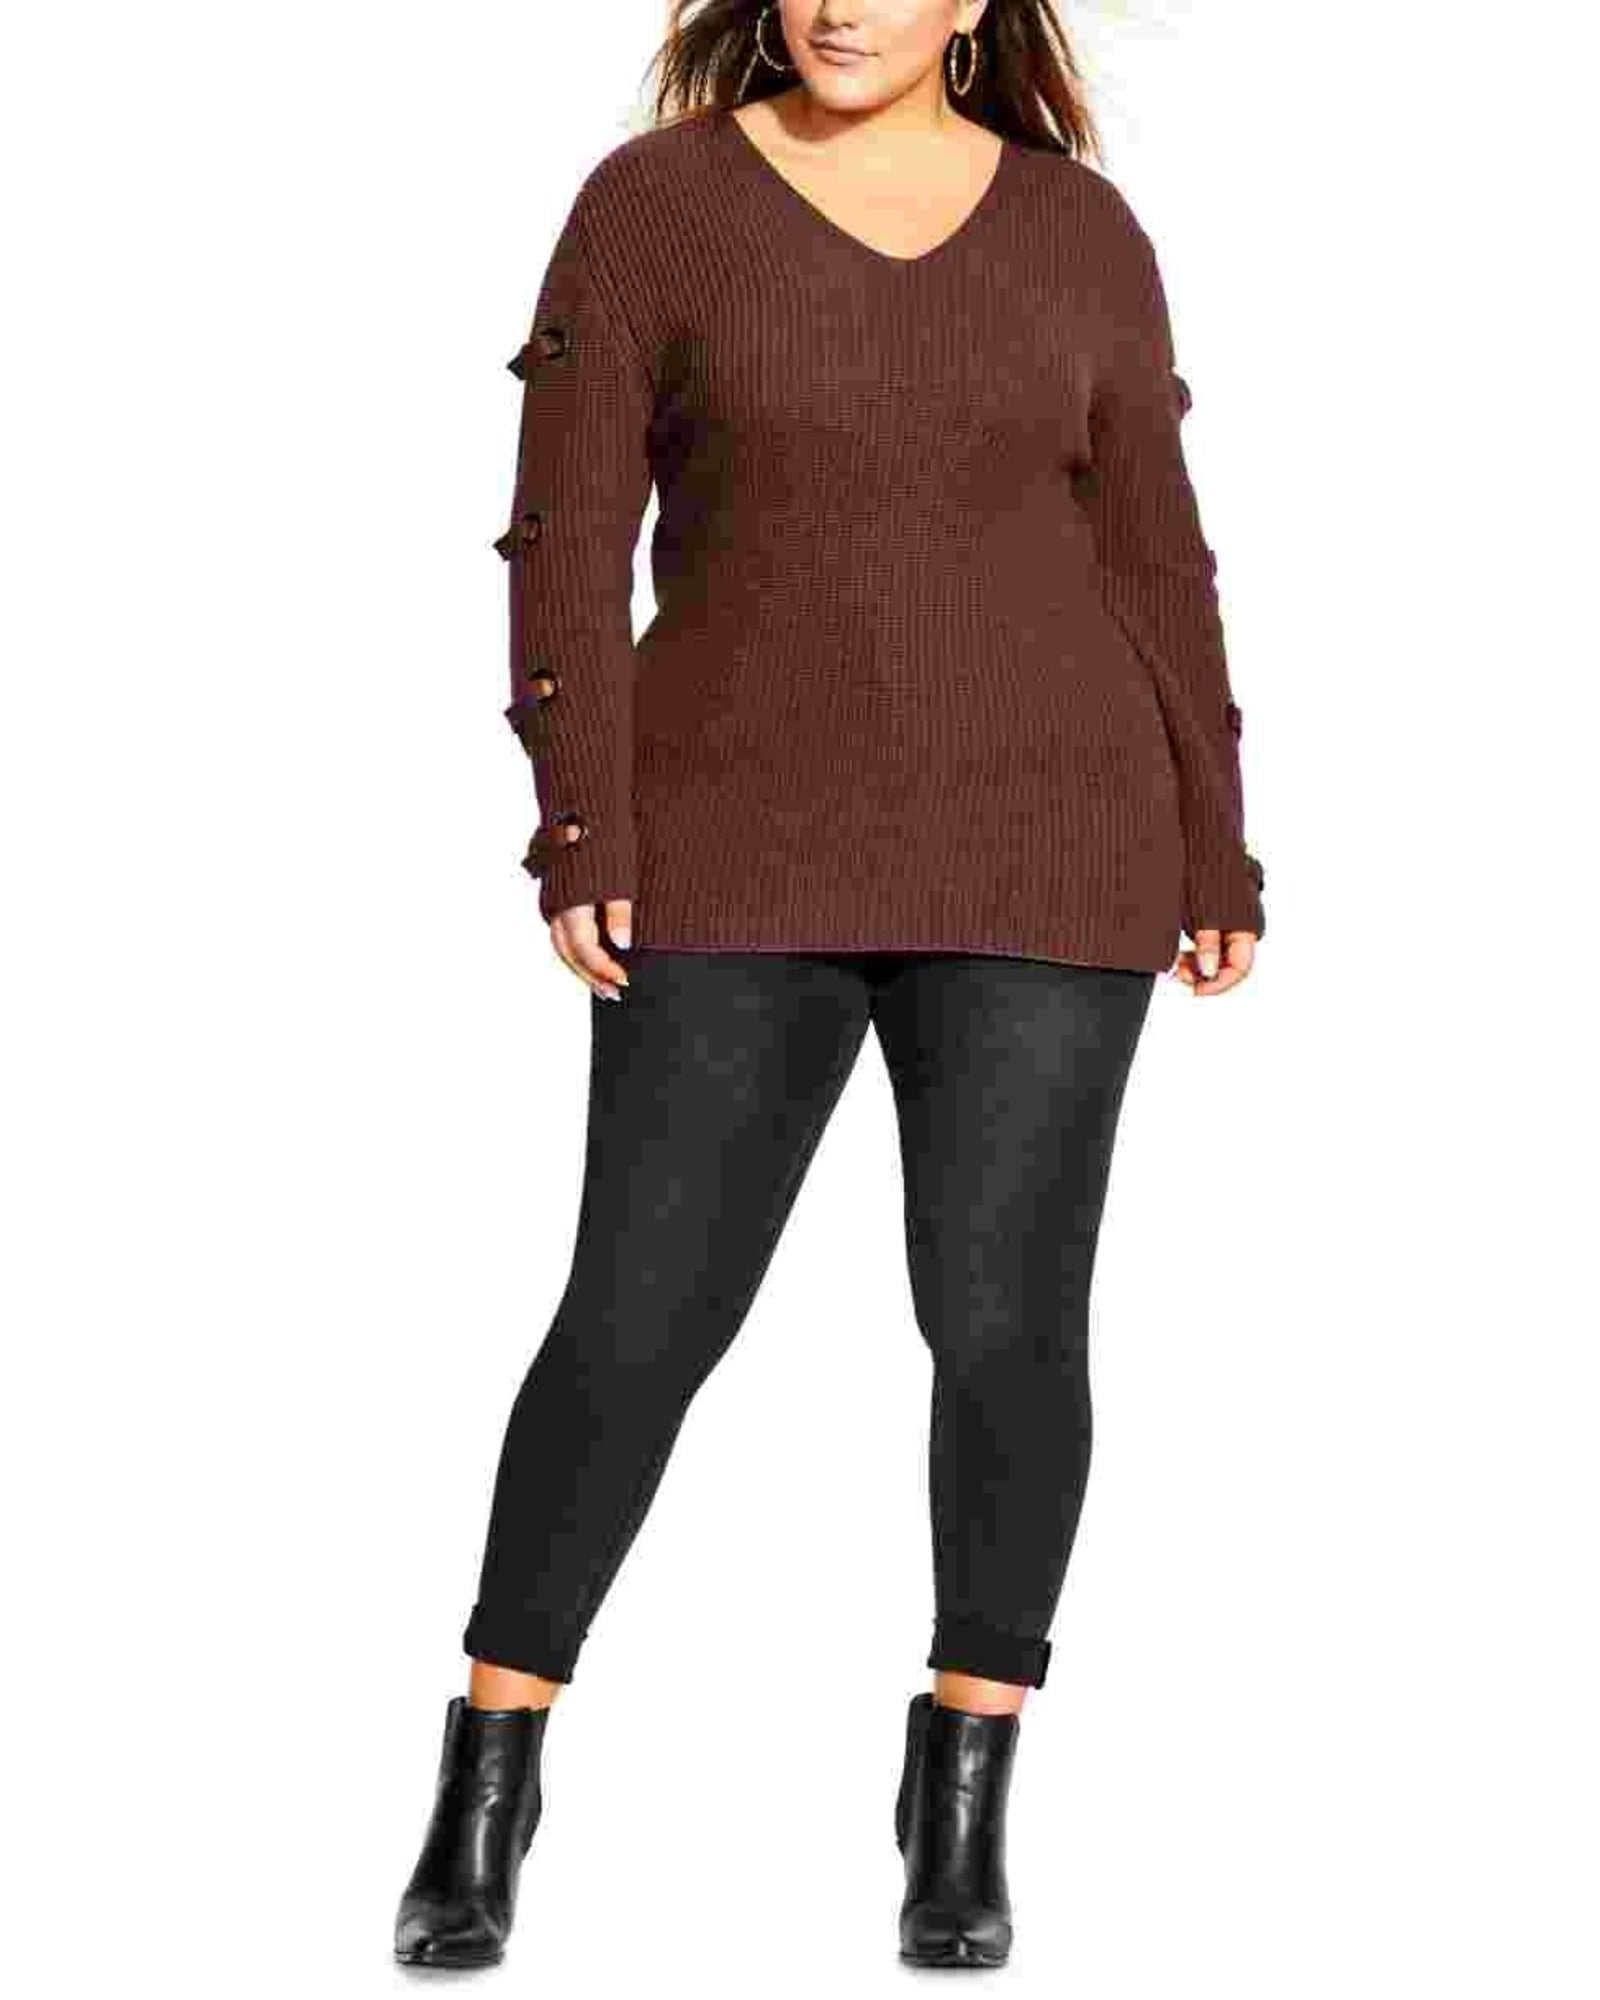 Plus Size Trendy Outfits